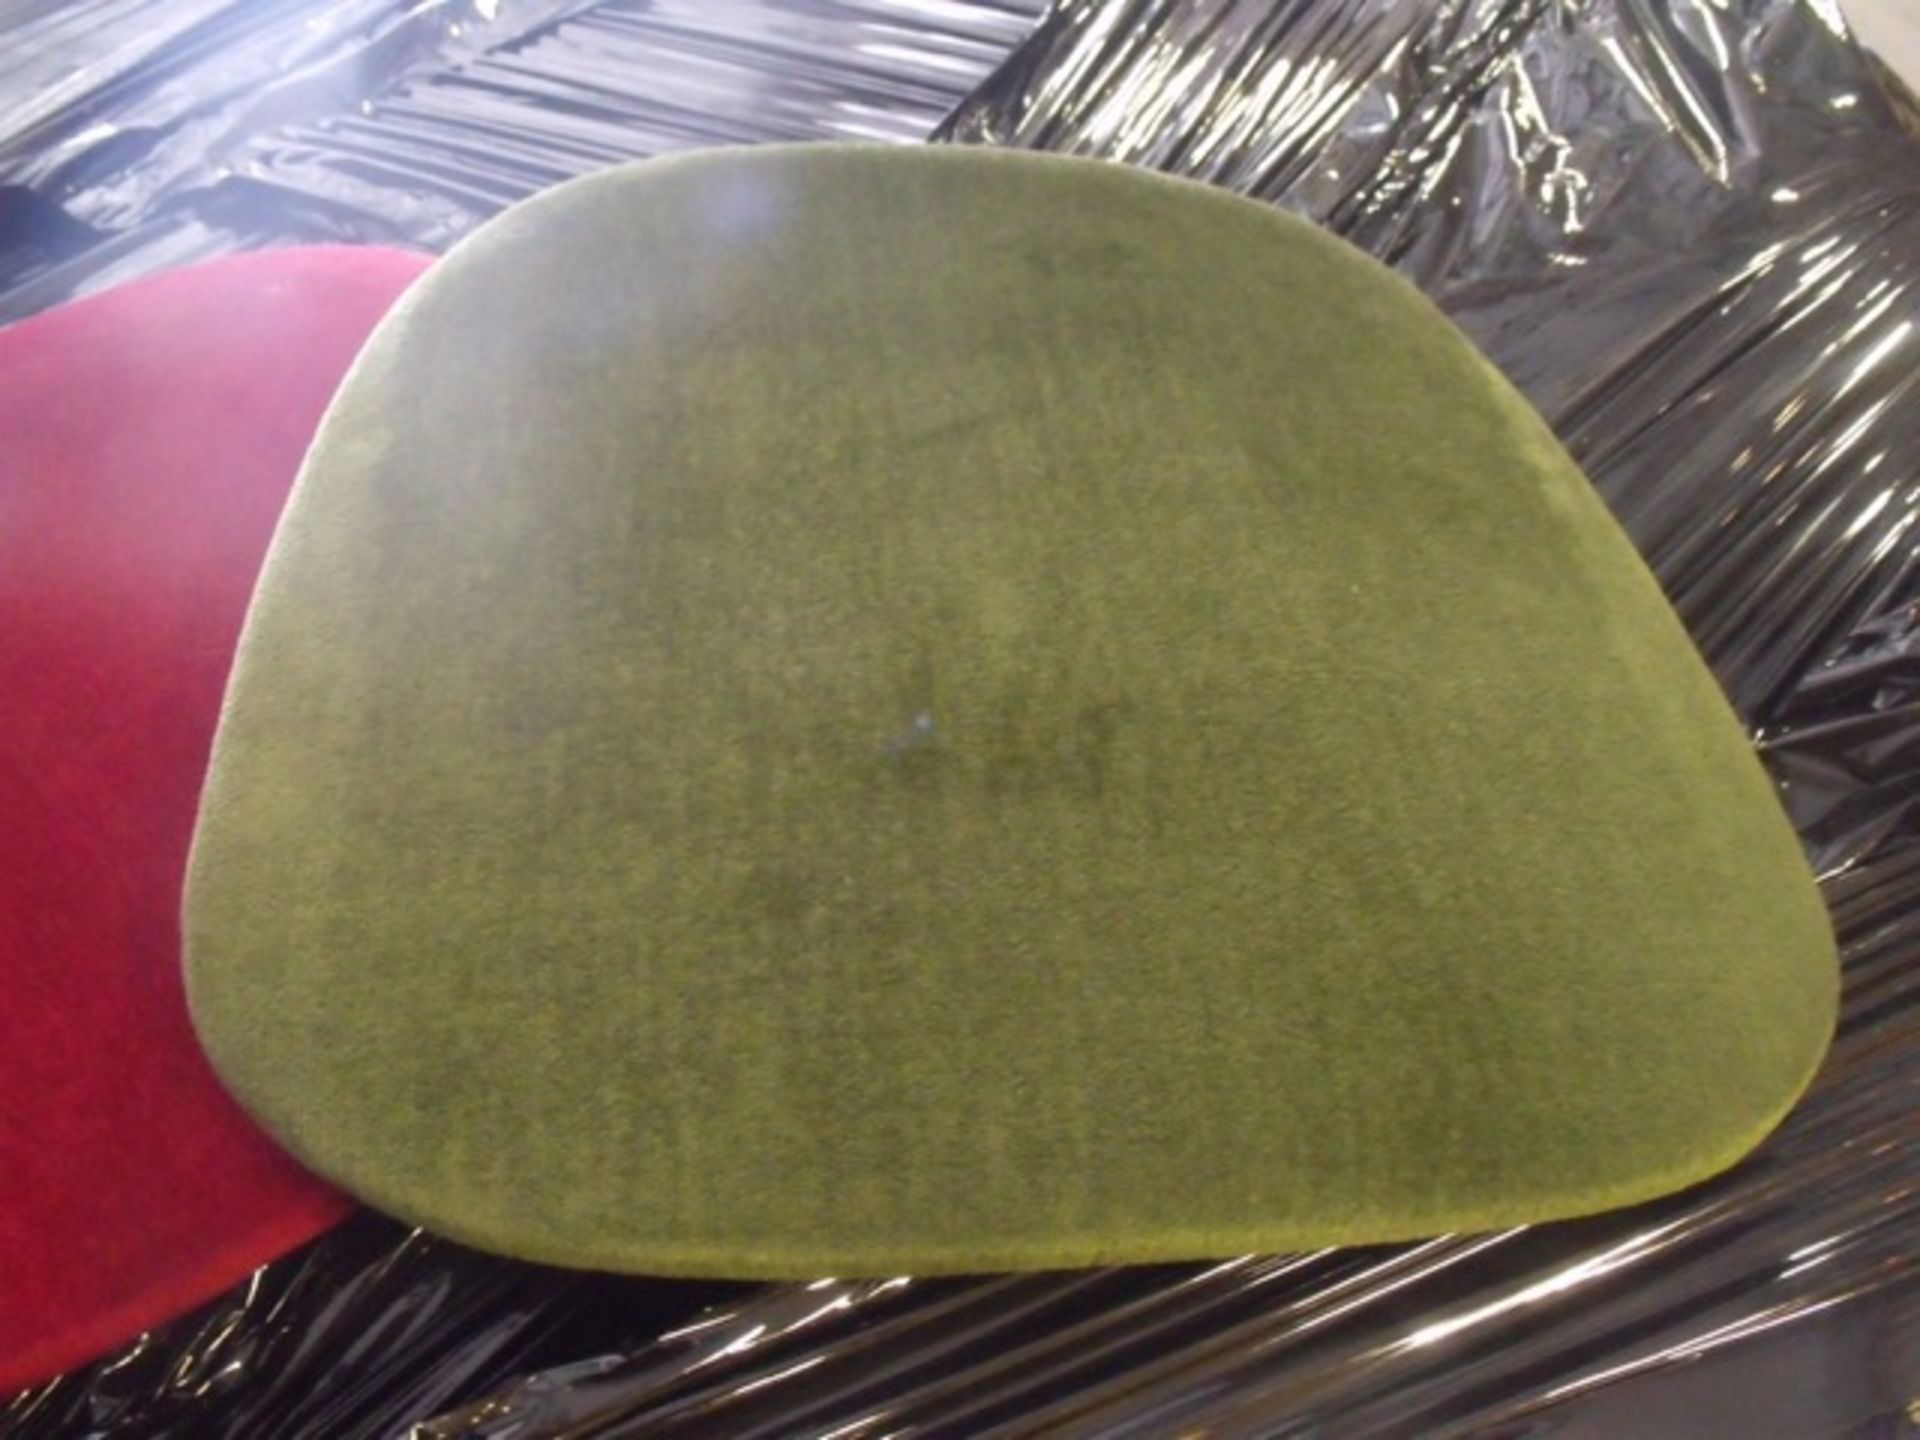 100 x used green velcro seat pads
to fit either the chivari or cheltenham style chair in previous